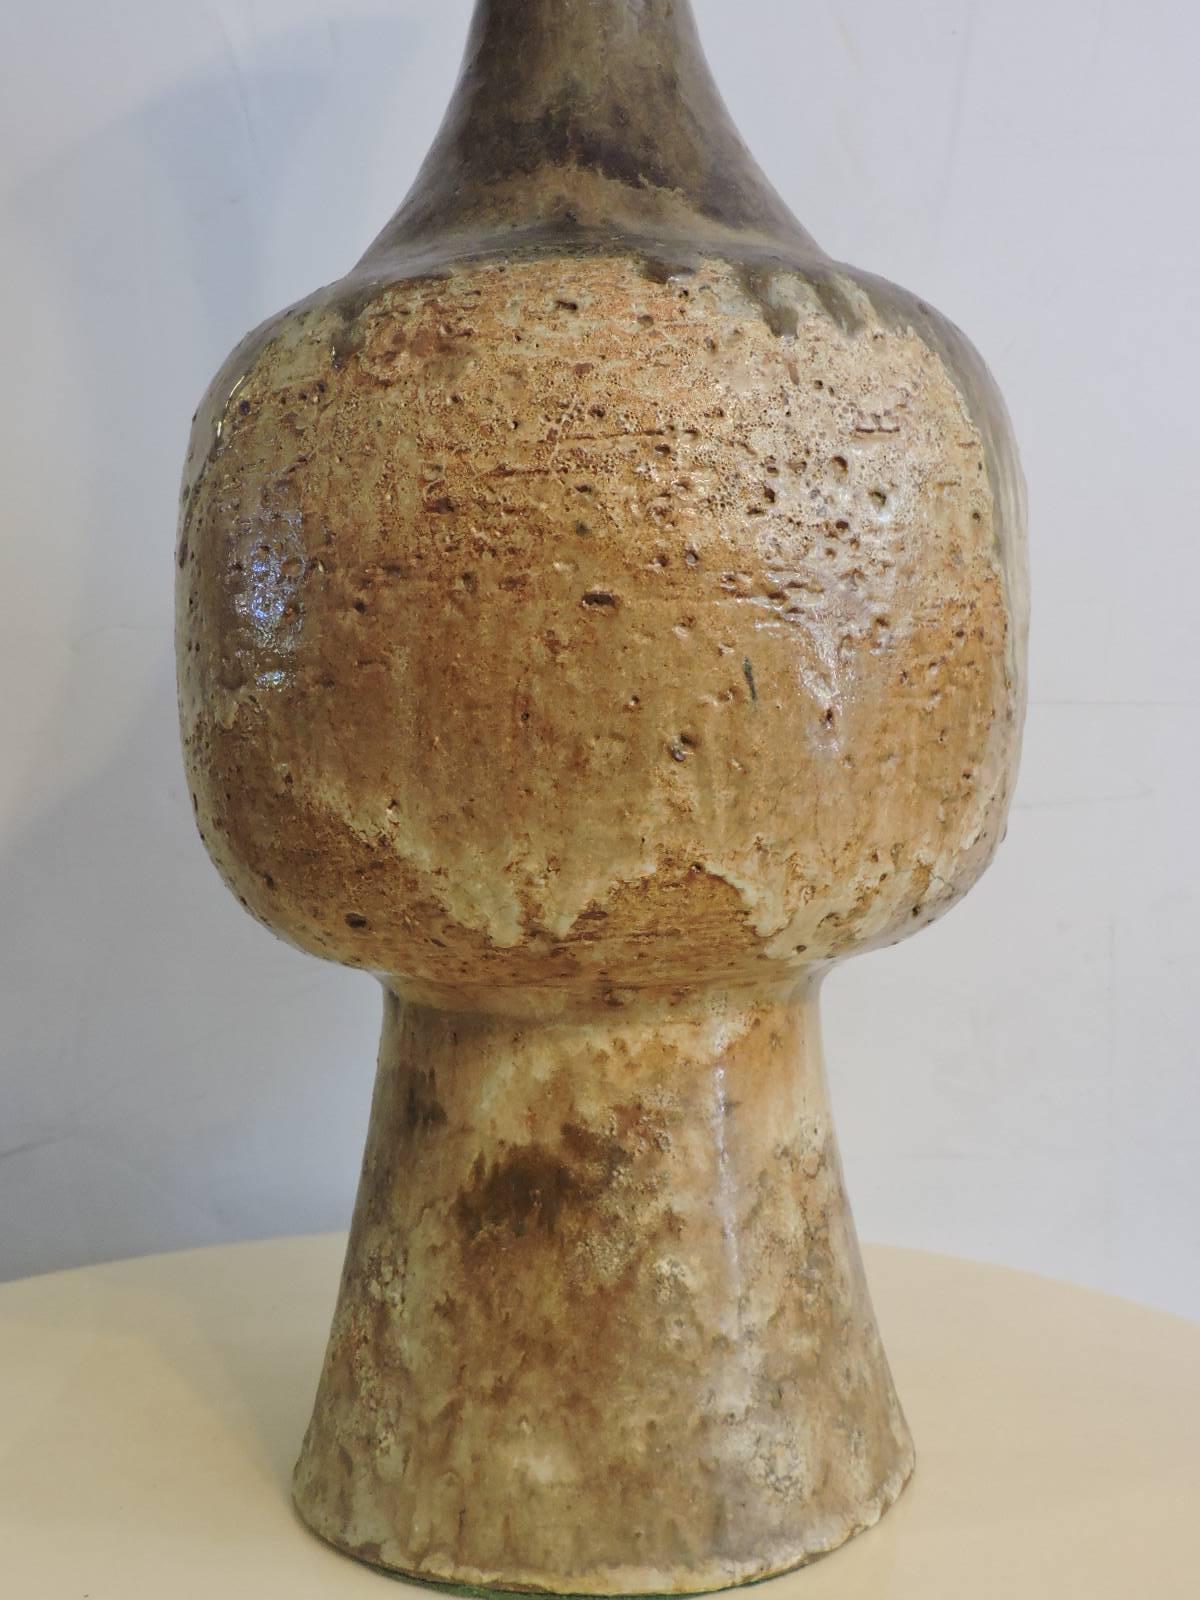 Very large and early glazed studio ceramic stoneware pottery vessel by Frans Wildenhain (see signature on underside bottom as well as writing numbers in red - pictures 9 & 10) with long tapered neck / bulbous body and elongated tapered